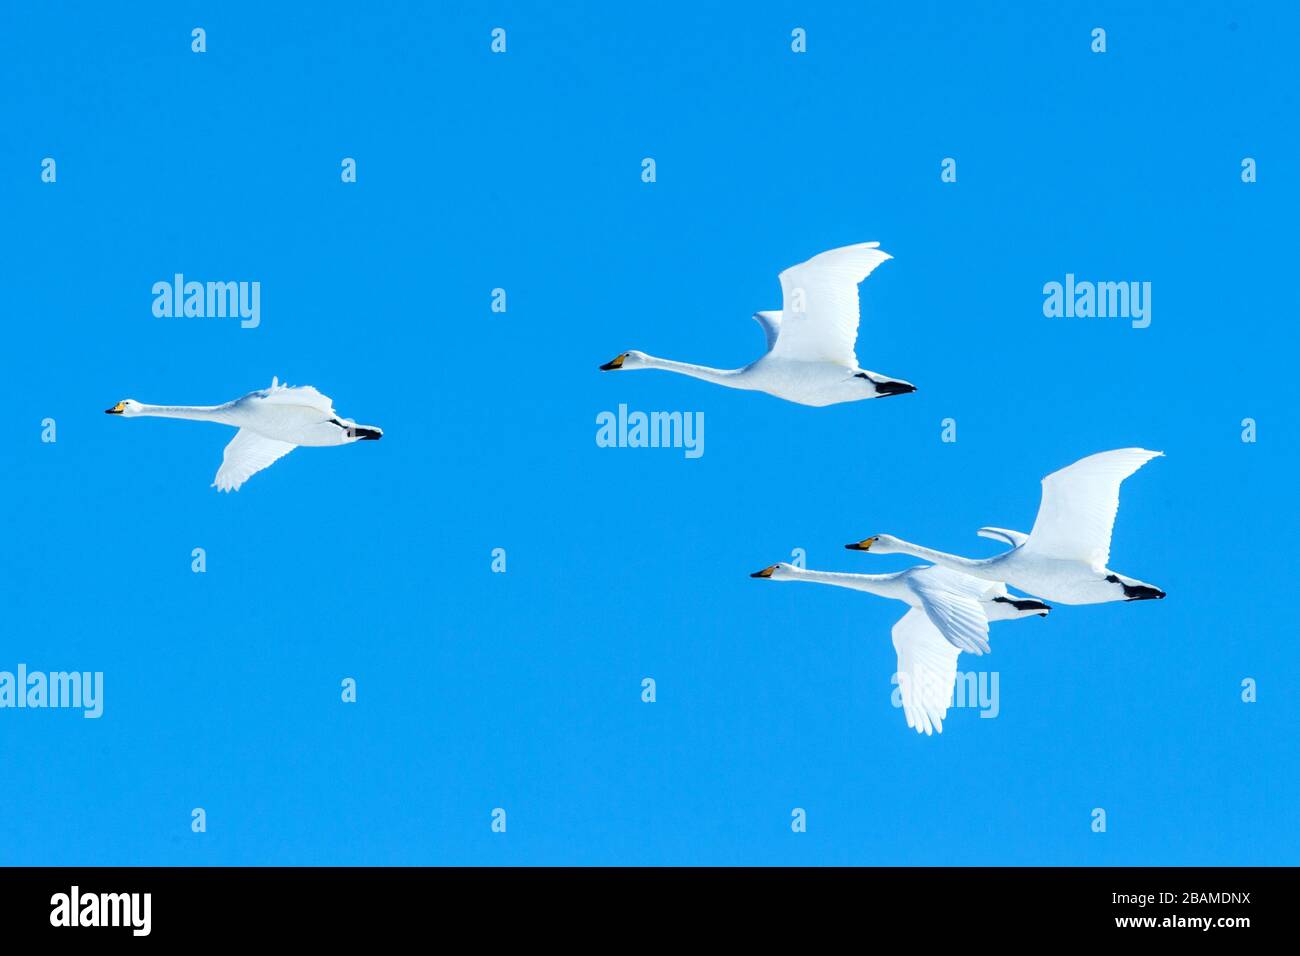 Flock of whooper swans (Cygnus cygnus) in flight with outstretched wings against blue sky, winter, Hokkaido, Japan, beautiful royal white birds flying Stock Photo